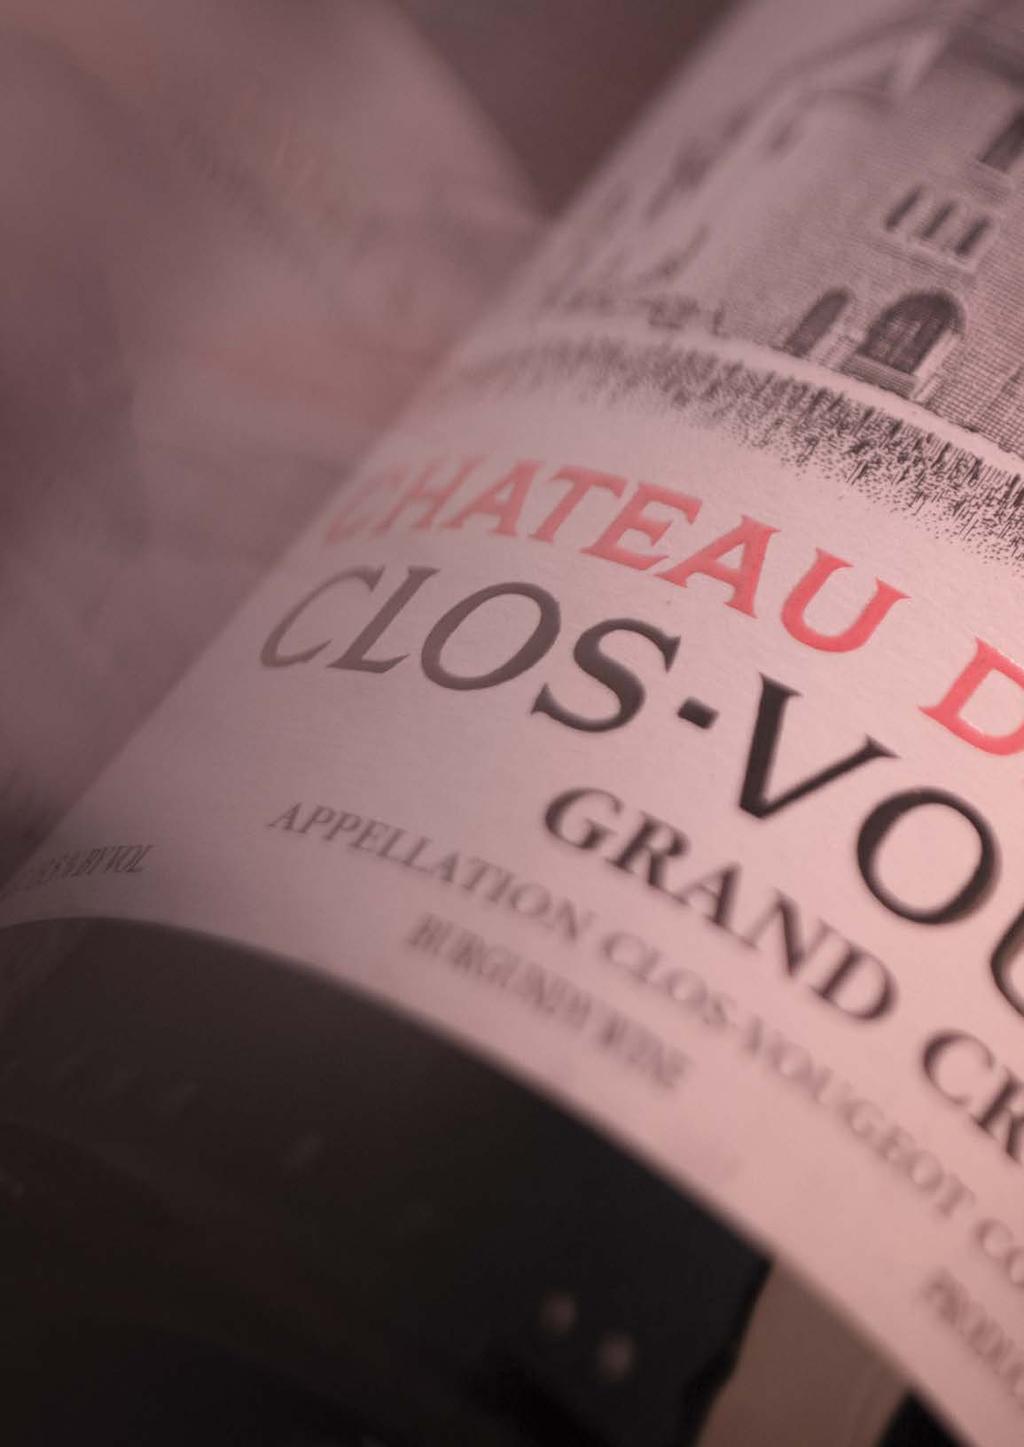 THE WINES CLOS DE VOUGEOT, GRAND CRU CUVÉE CLASSIQUE Jet-ruby in colour, this presents red berries and cherries on the nose, intensely concentrated with focused, sweet old vine fruit, underpinned by